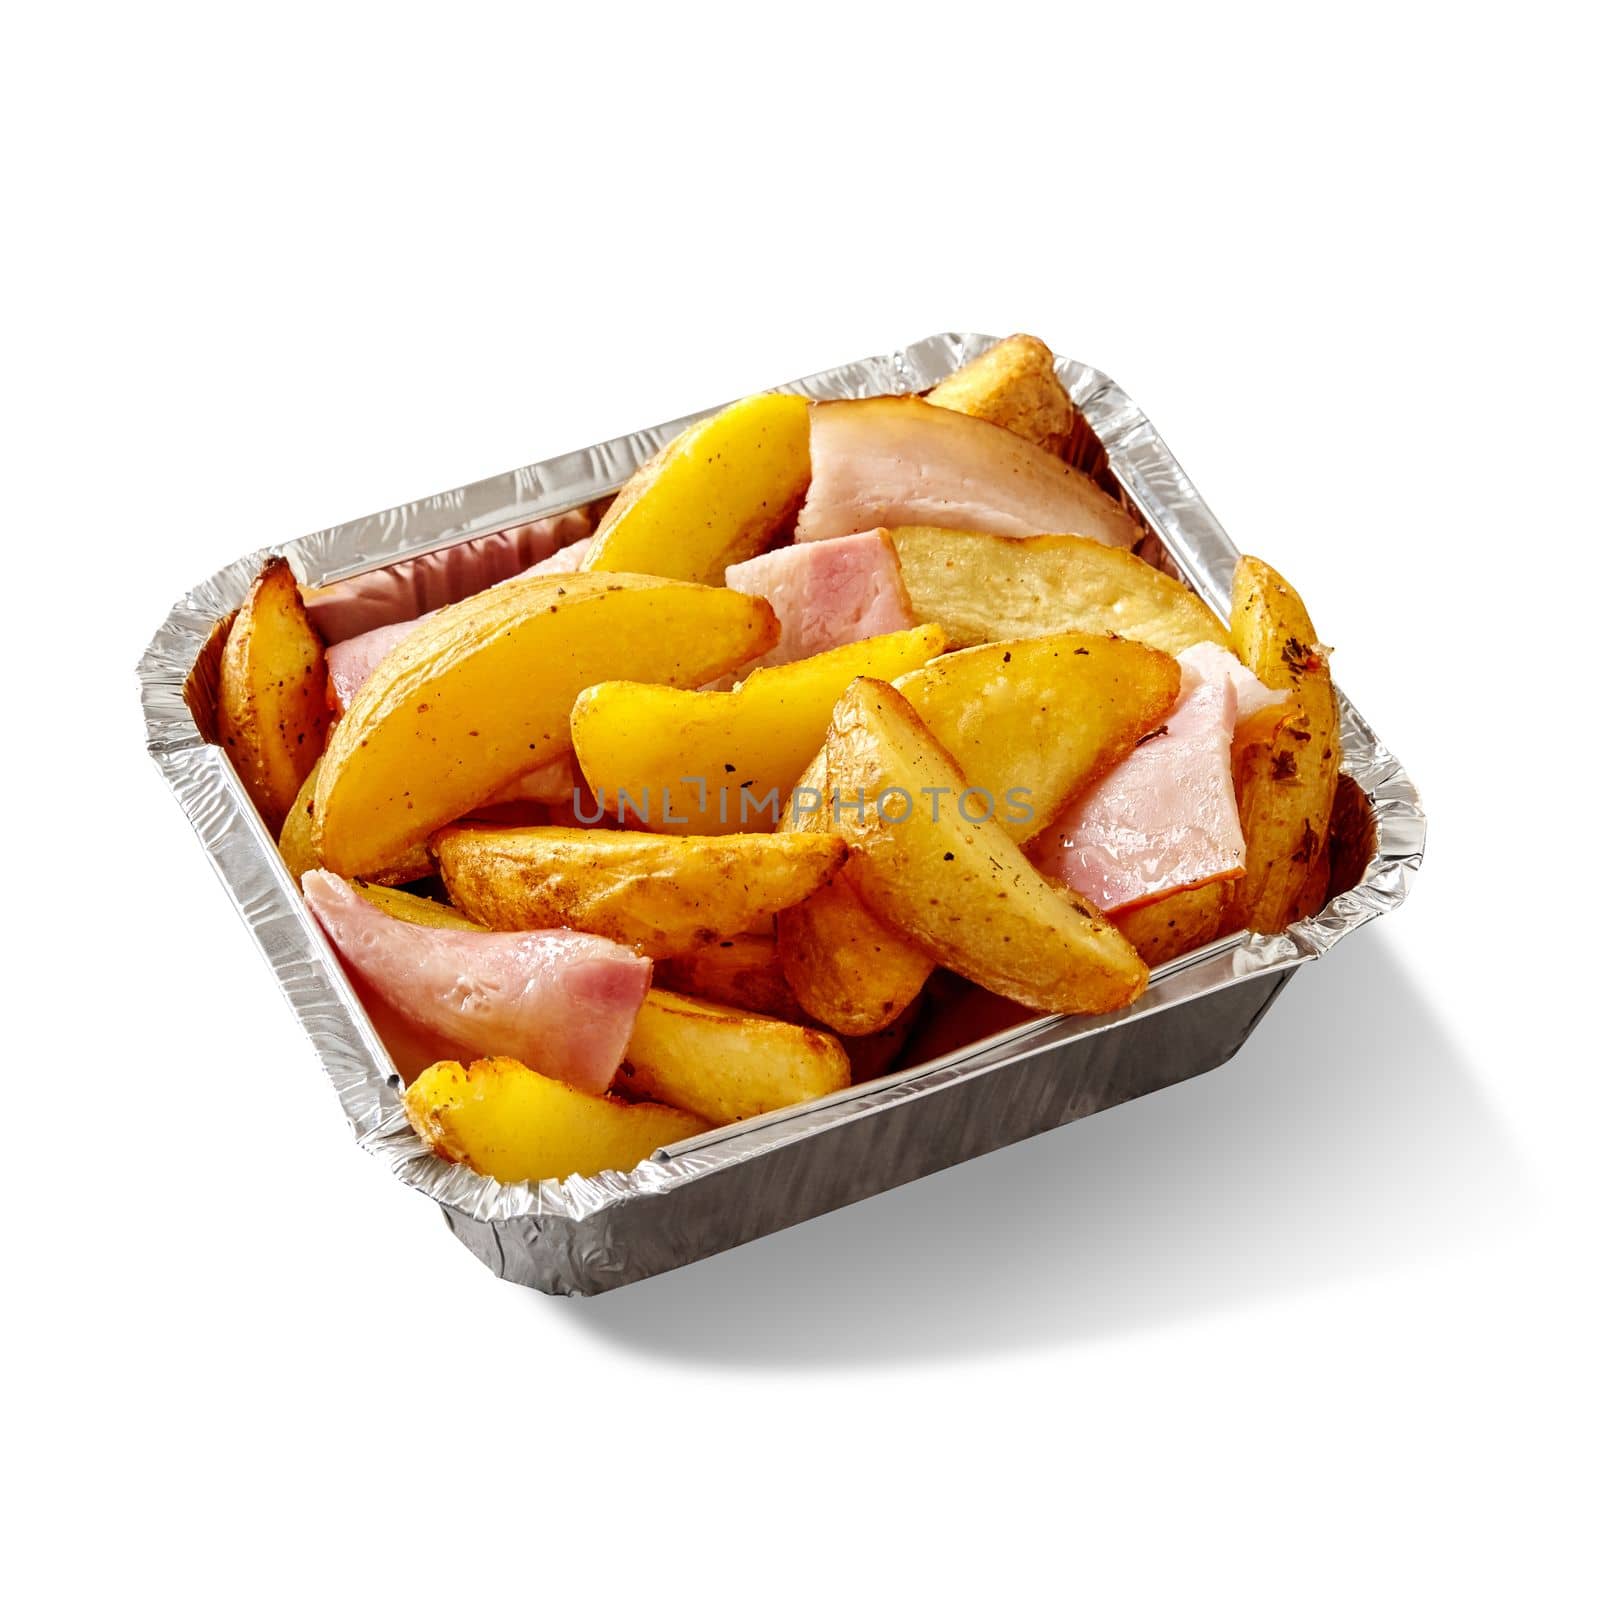 Appetizing browned crispy baked potato wedges with bacon slices served in aluminium foil container isolated on white background. Popular side dish and fast food snack. Takeaway food concept